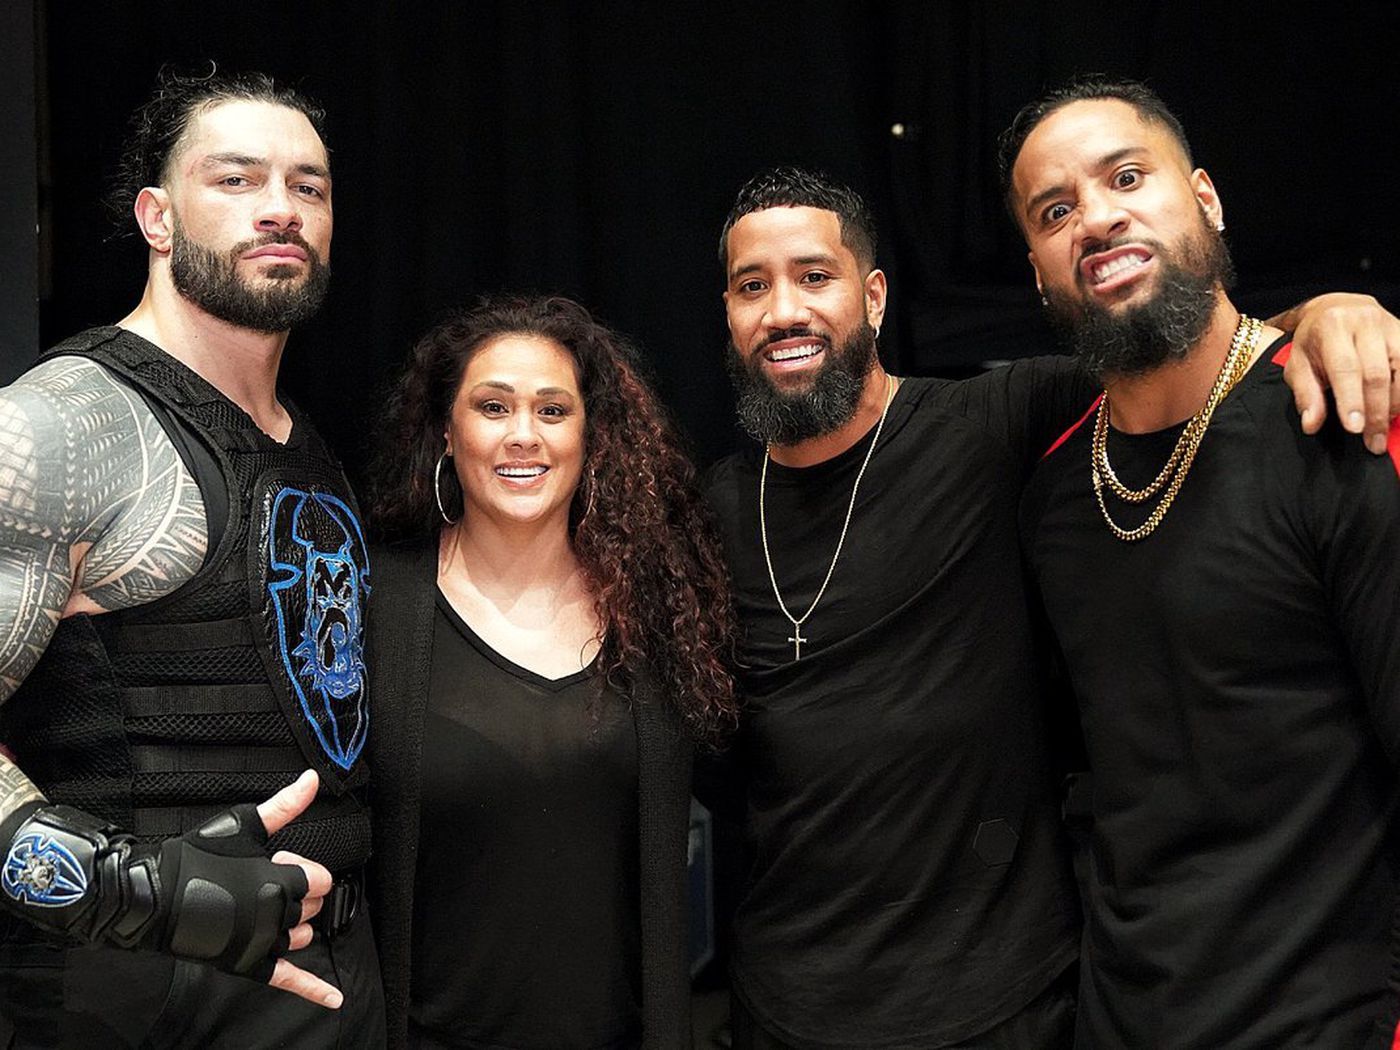 Roman Reigns is really glad The Usos are back